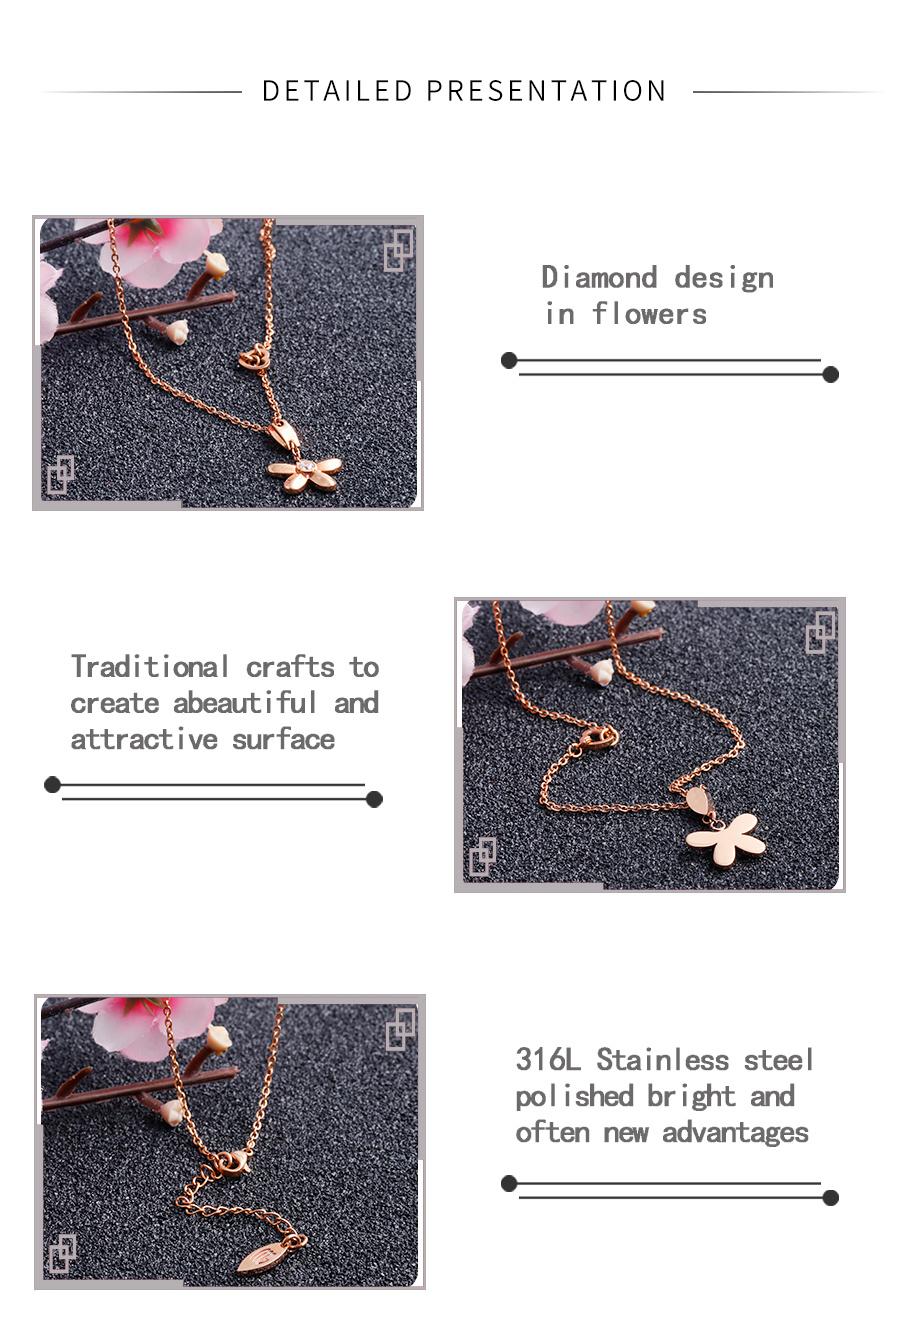 Fashion Jewelry Stainless Steel Jewelry Five-Leaf Flower Necklace